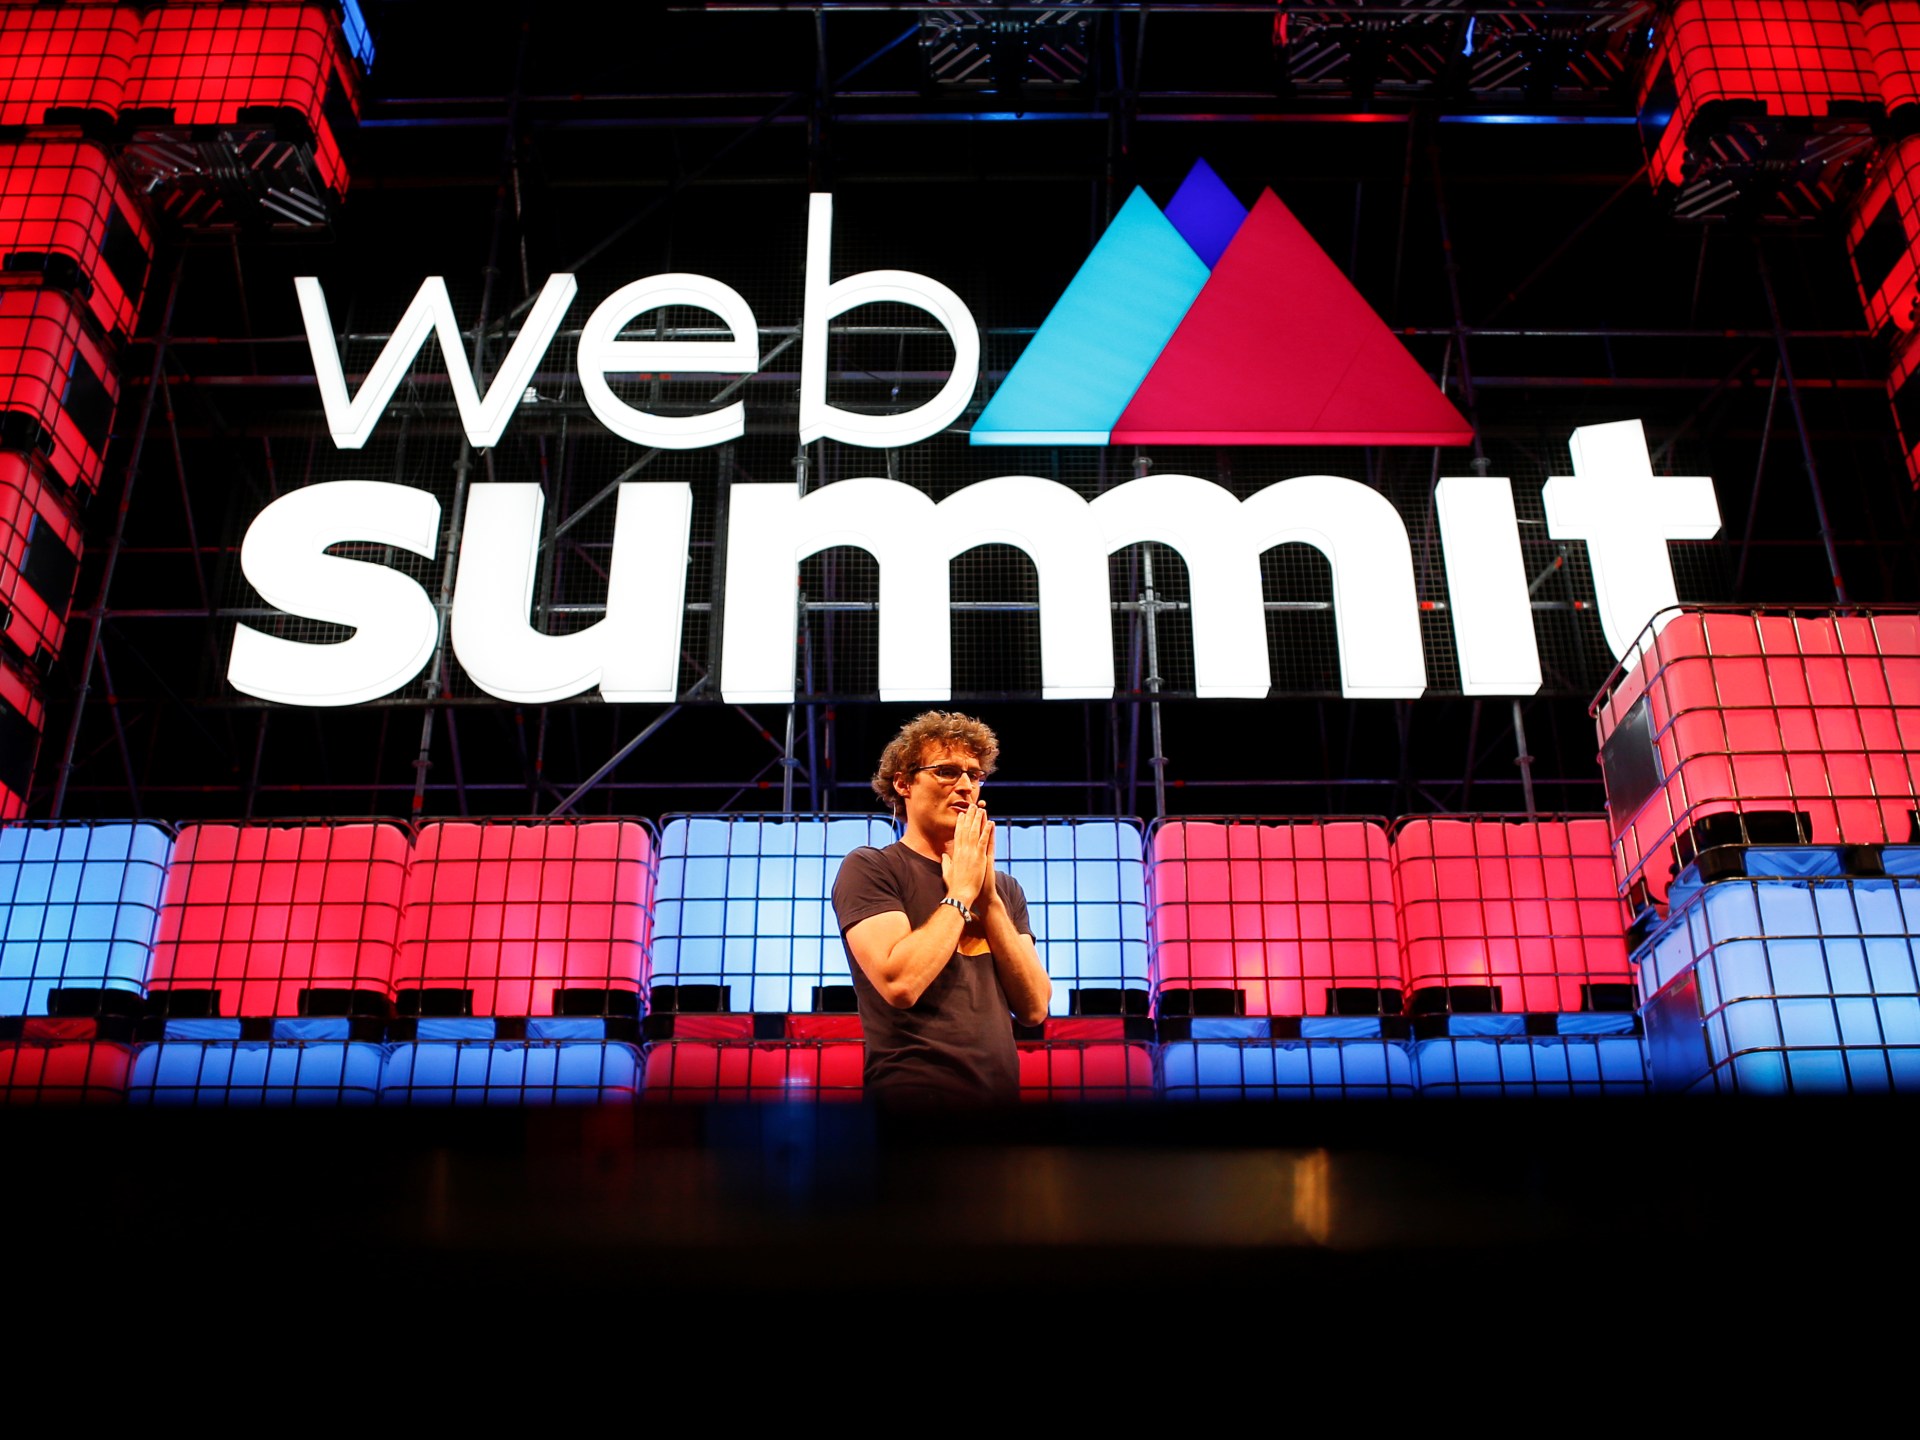 Paddy Cosgrave returns to Web Summit after resigning over Israel criticism